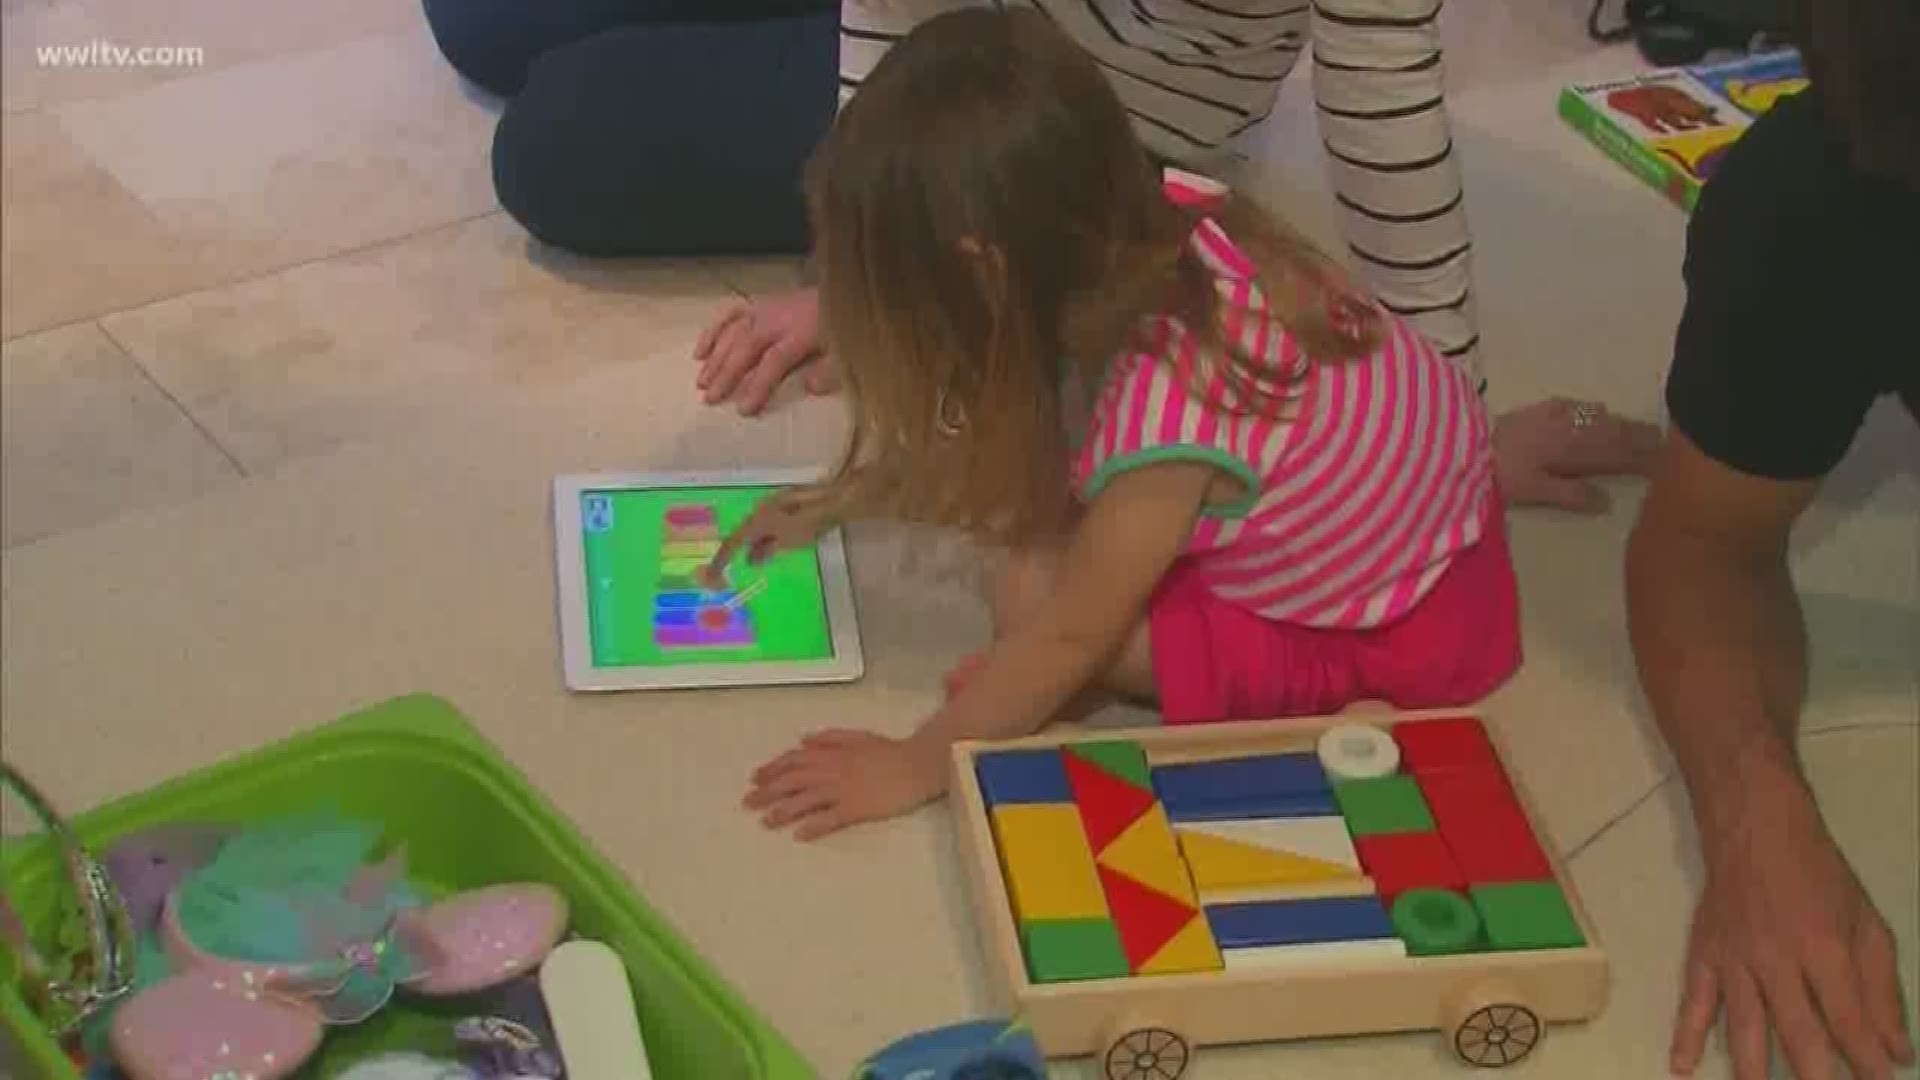 The World Health Organization has created its first guidelines on kids and screen time.